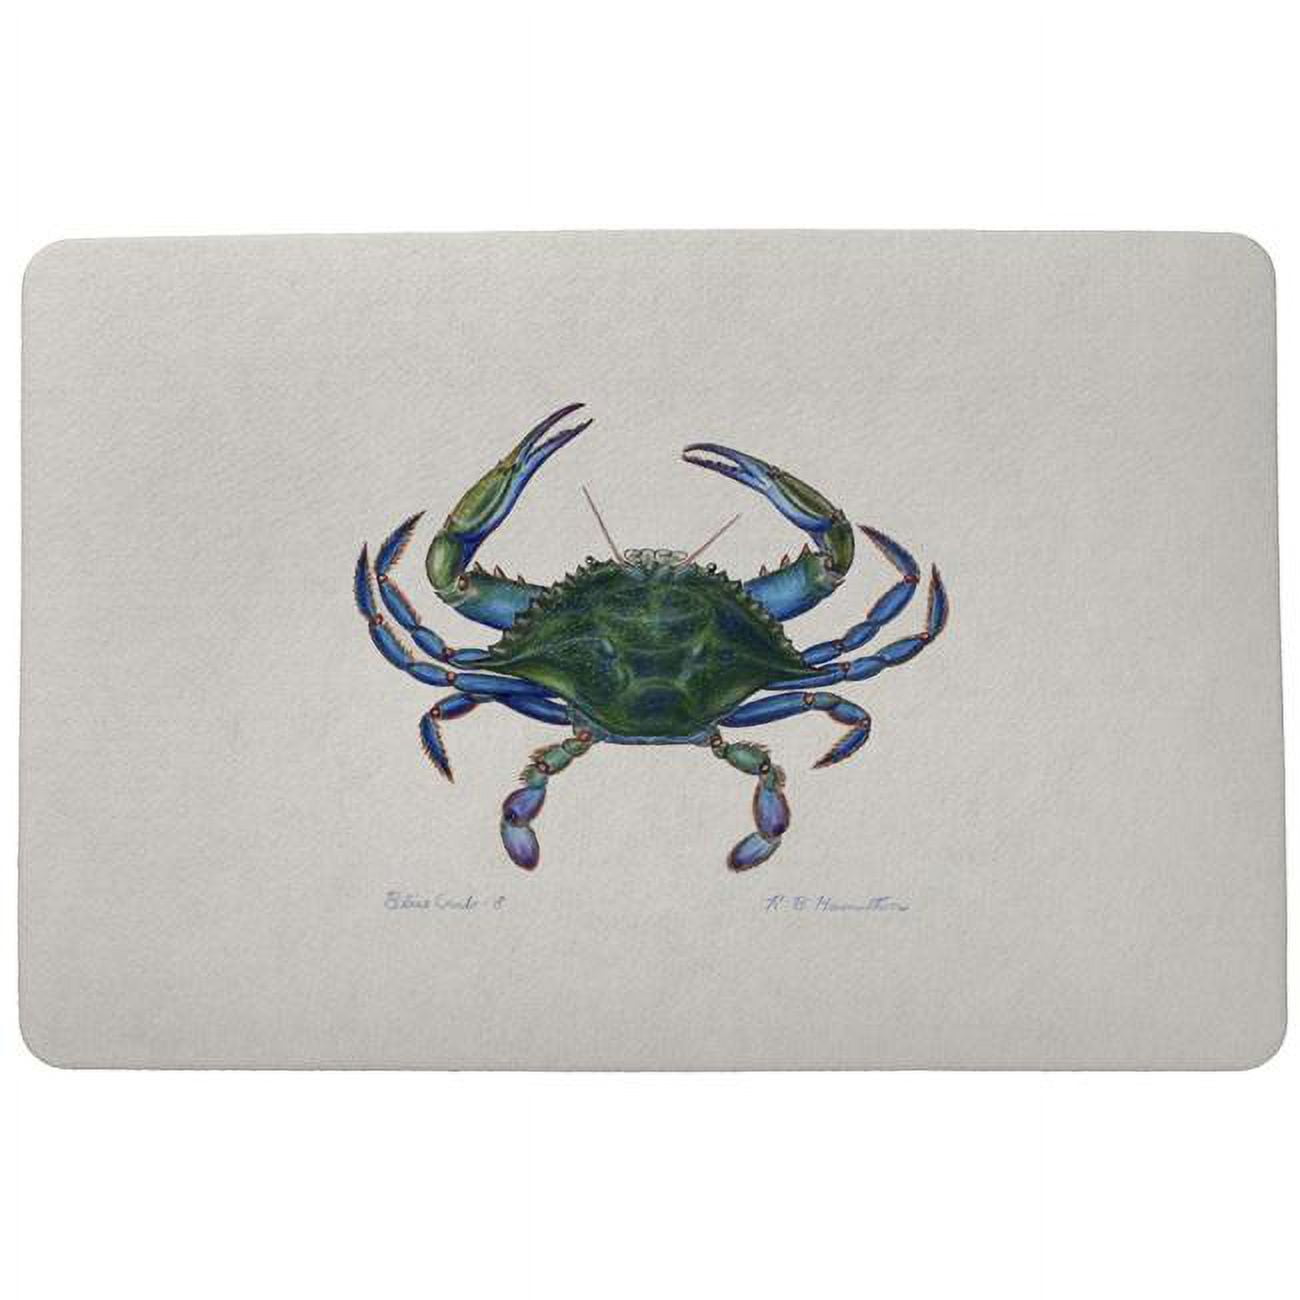 Picture of Betsydrake DM005 18 x 26 in. Male Crab Door Mat -